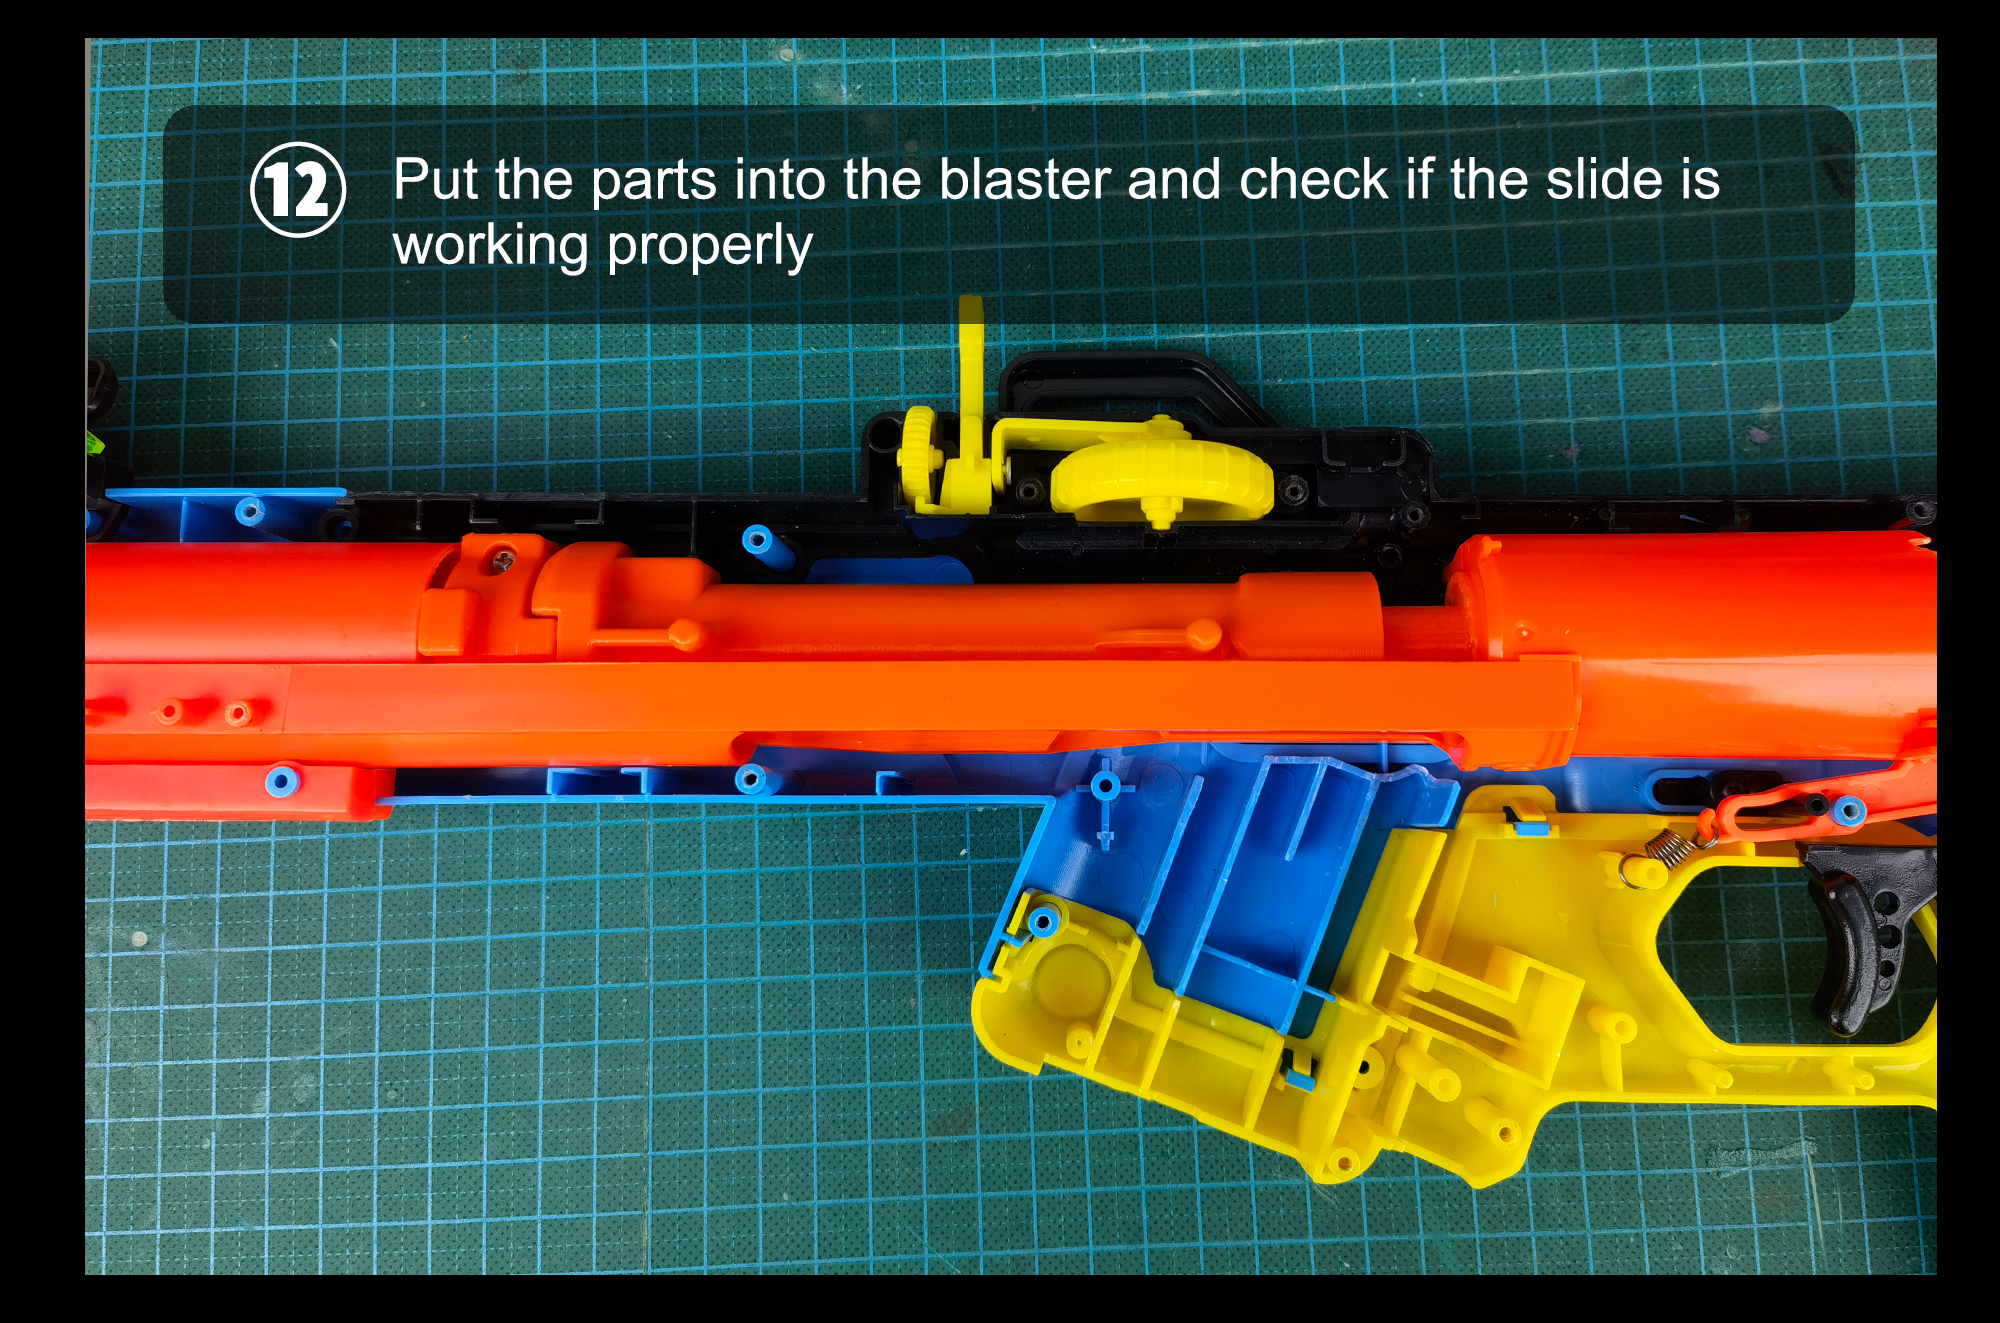 Worker Short Dart Conversion kit for NERF Rival Pathfinder Instructions